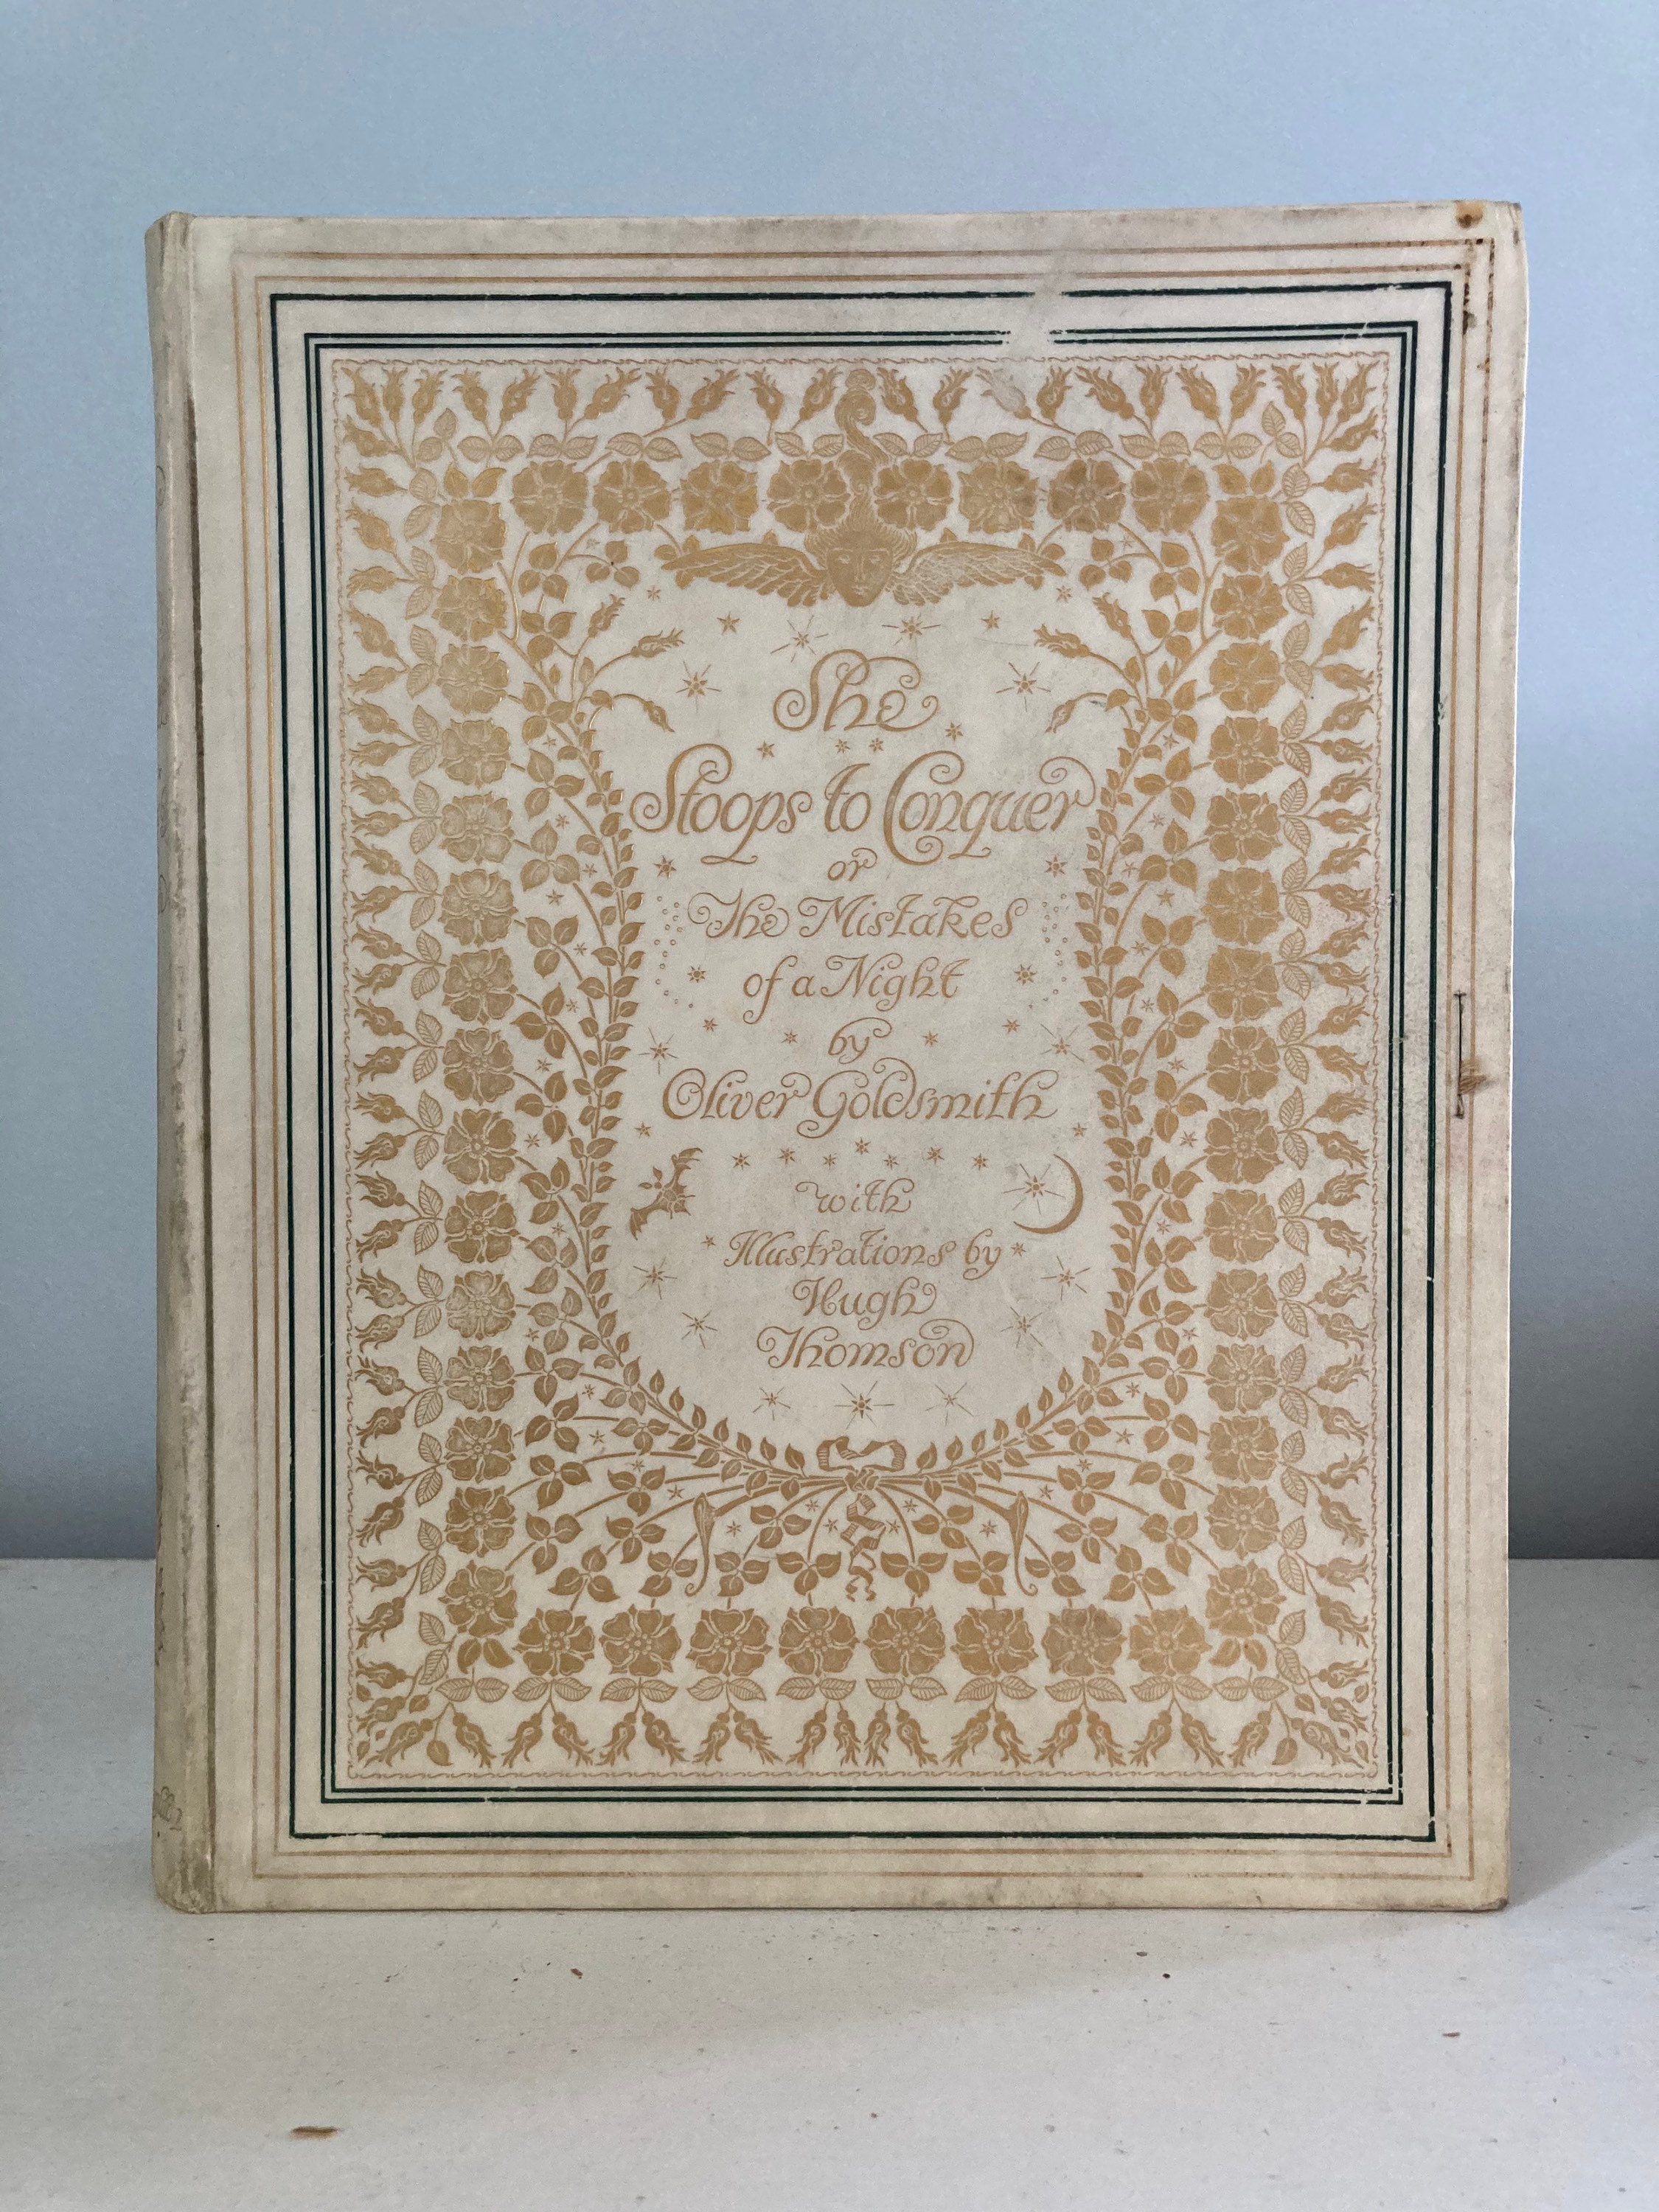 1912 She Stoops to Conquer by Oliver Goldsmith, illustrated and signed ...